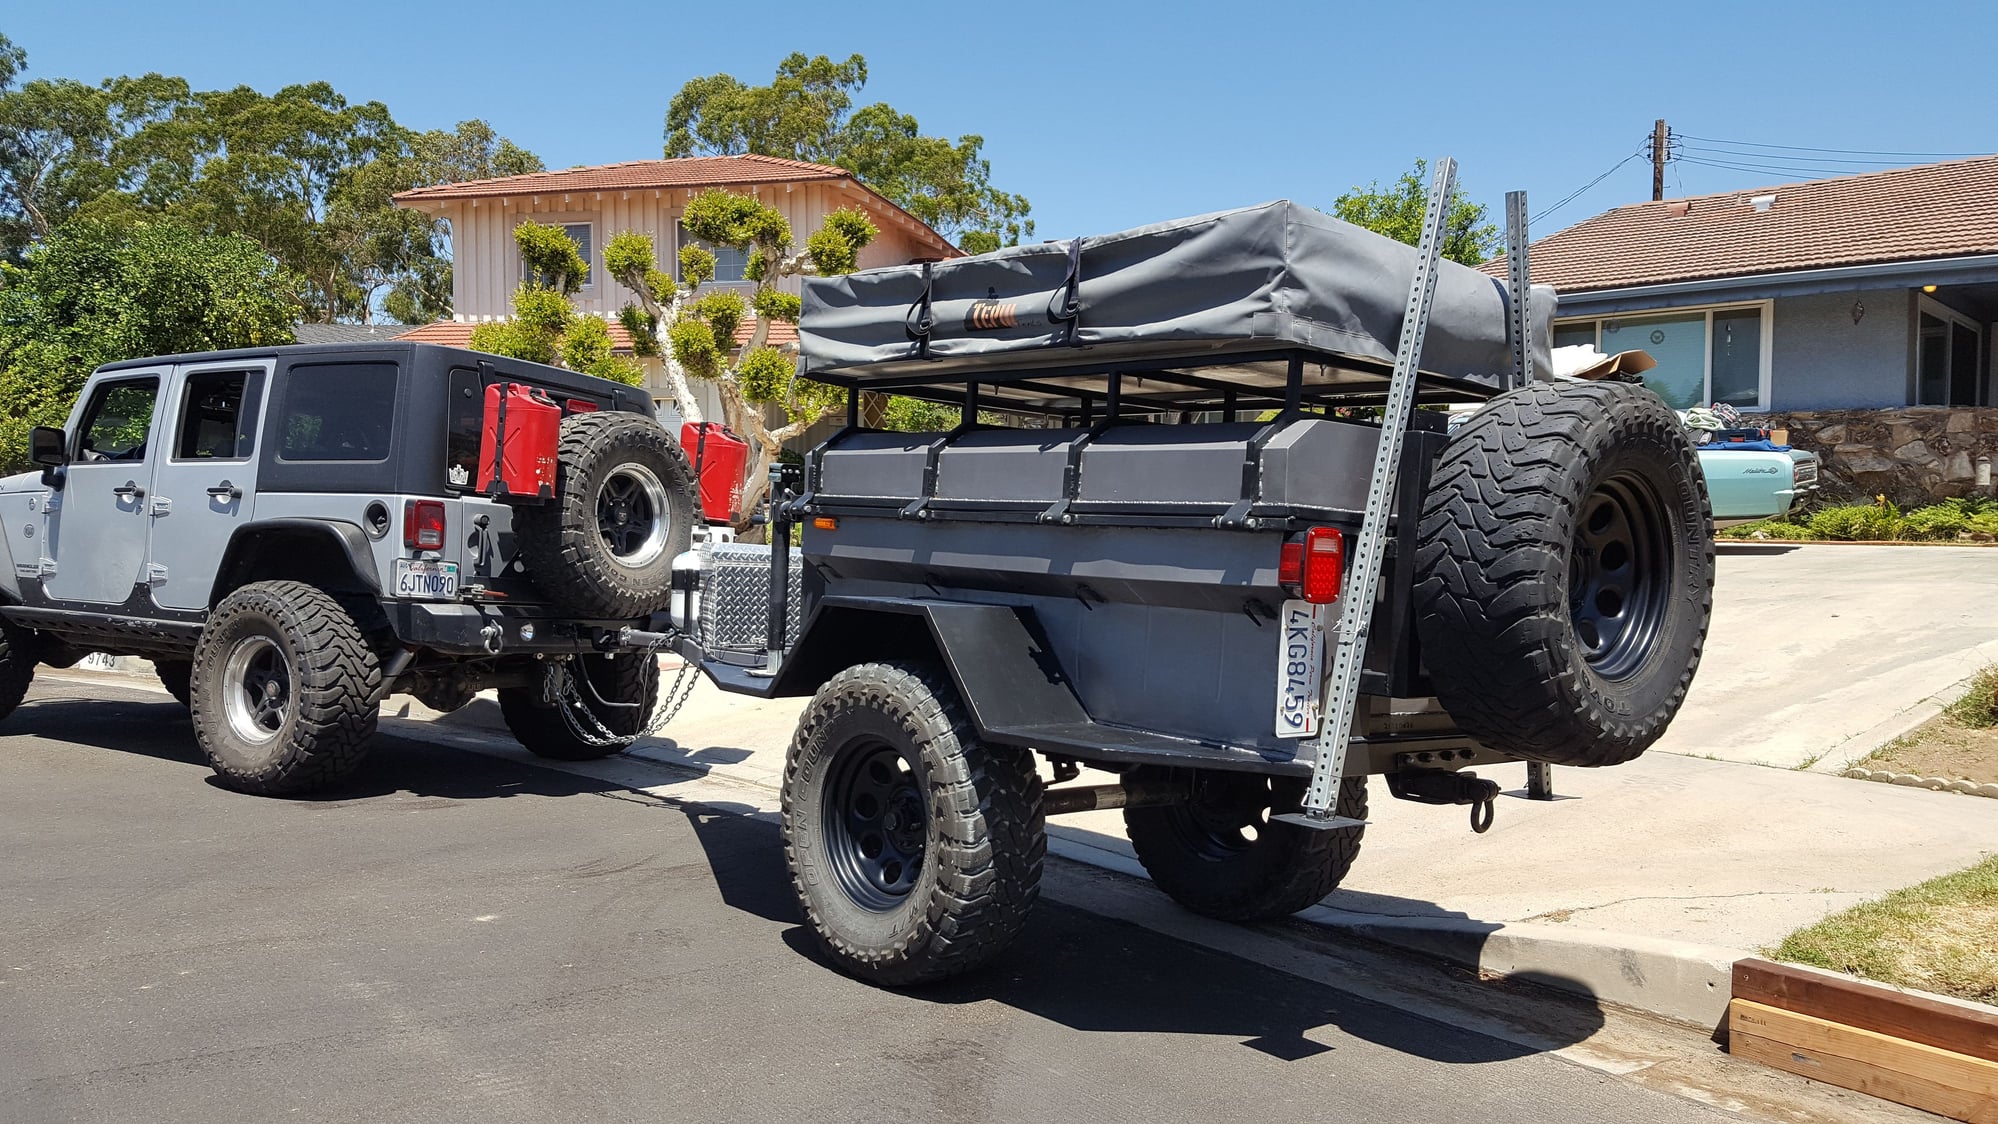 Miscellaneous - Expedition Trailer on 35" Tires - Used - North Hills, CA 91343, United States